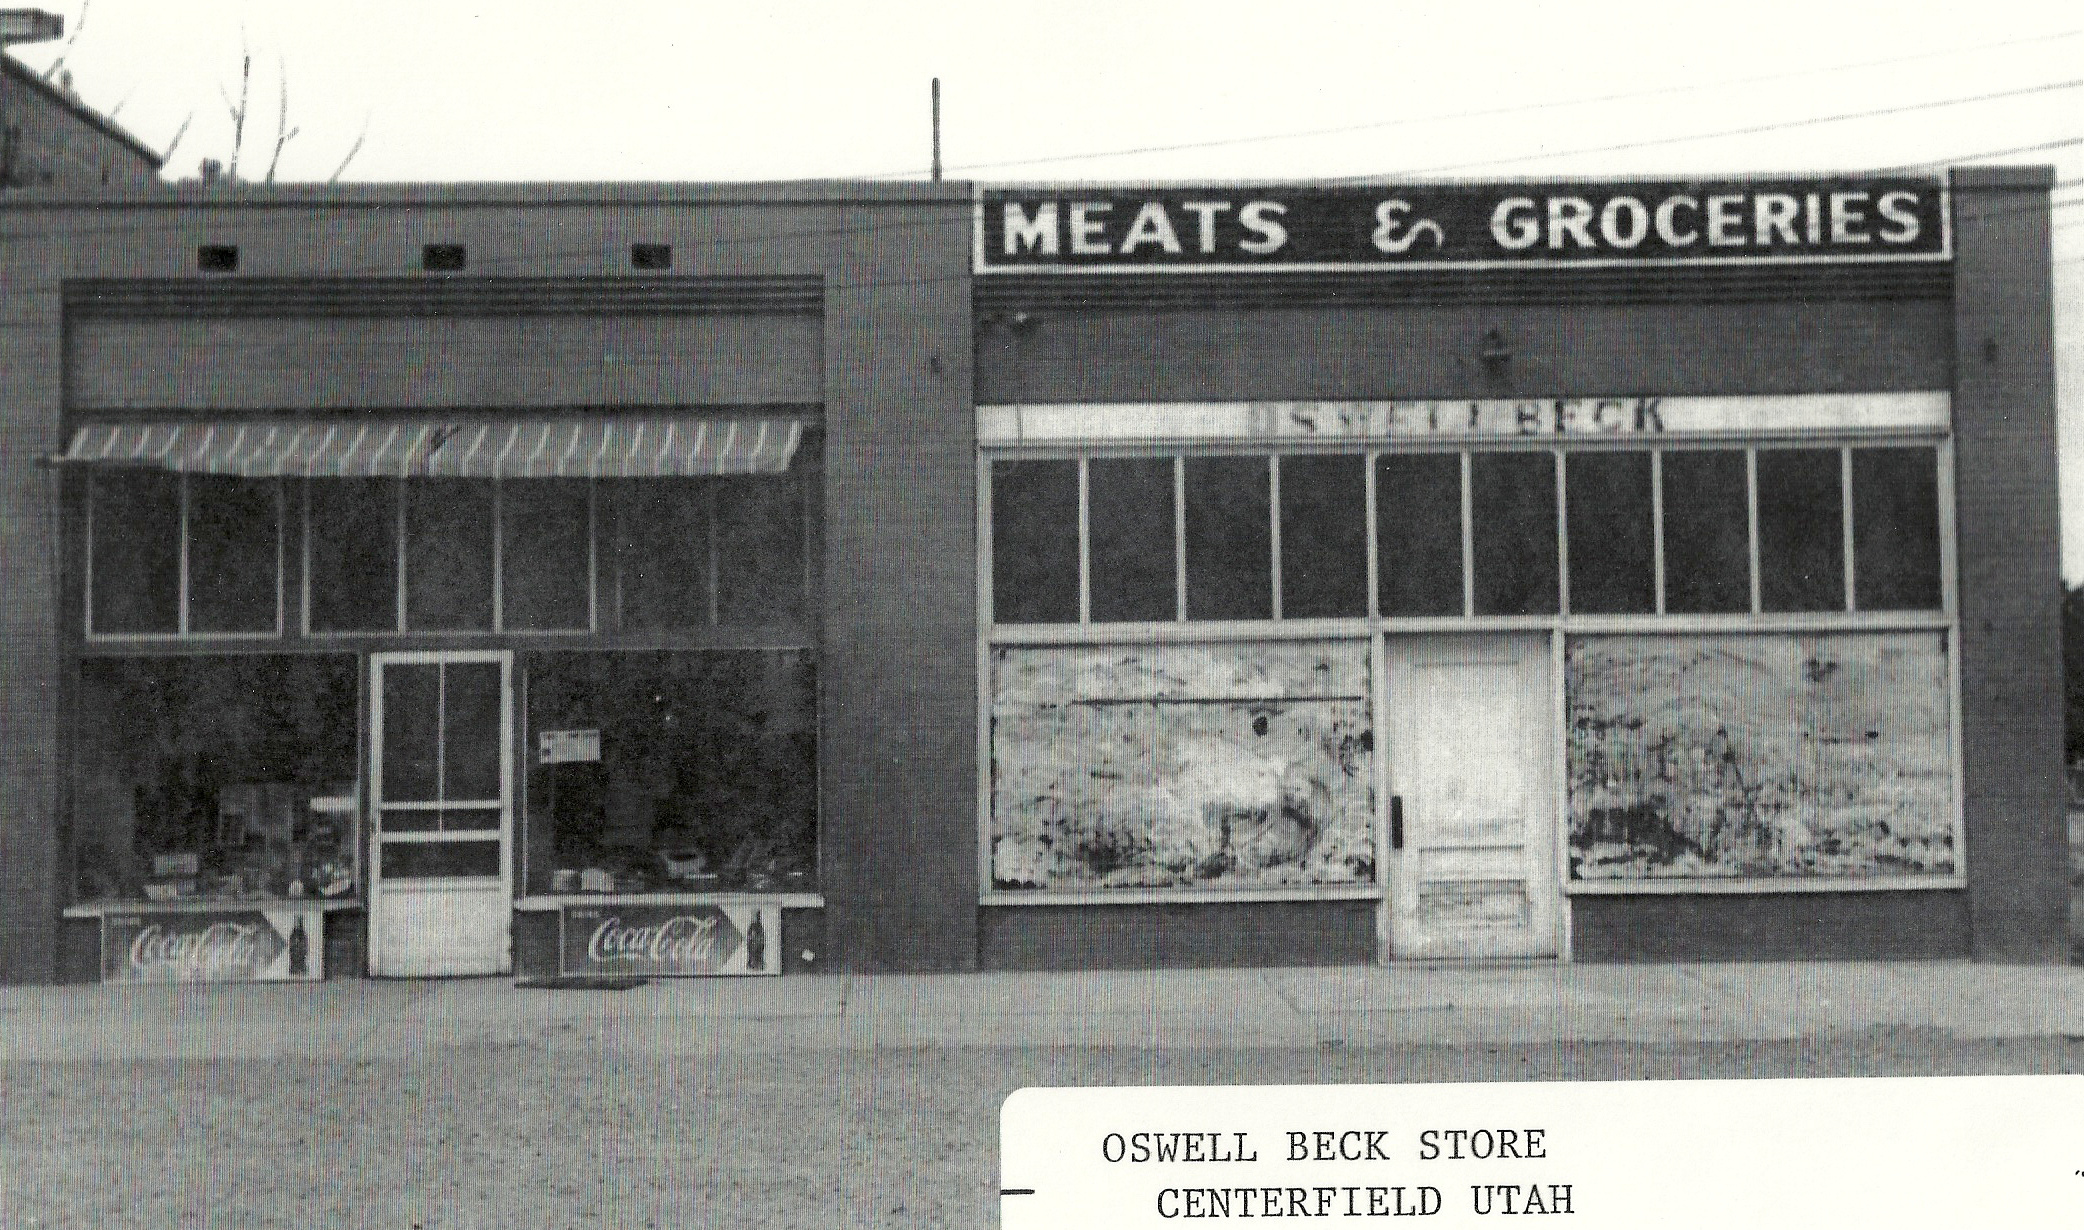 Oswell Beck Store